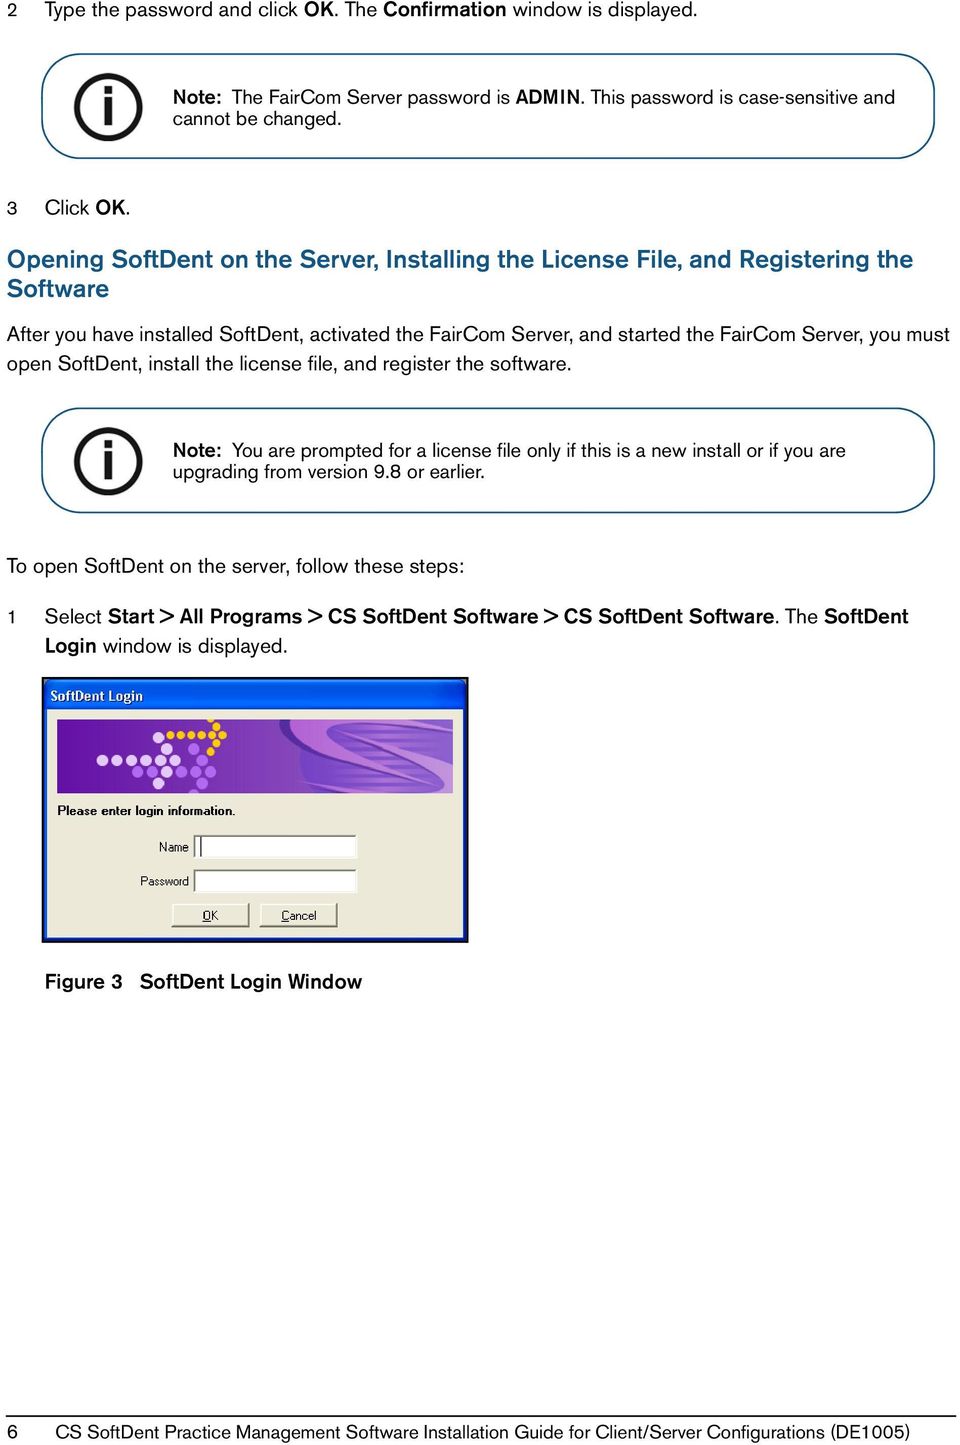 open SoftDent, install the license file, and register the software. Note: You are prompted for a license file only if this is a new install or if you are upgrading from version 9.8 or earlier.